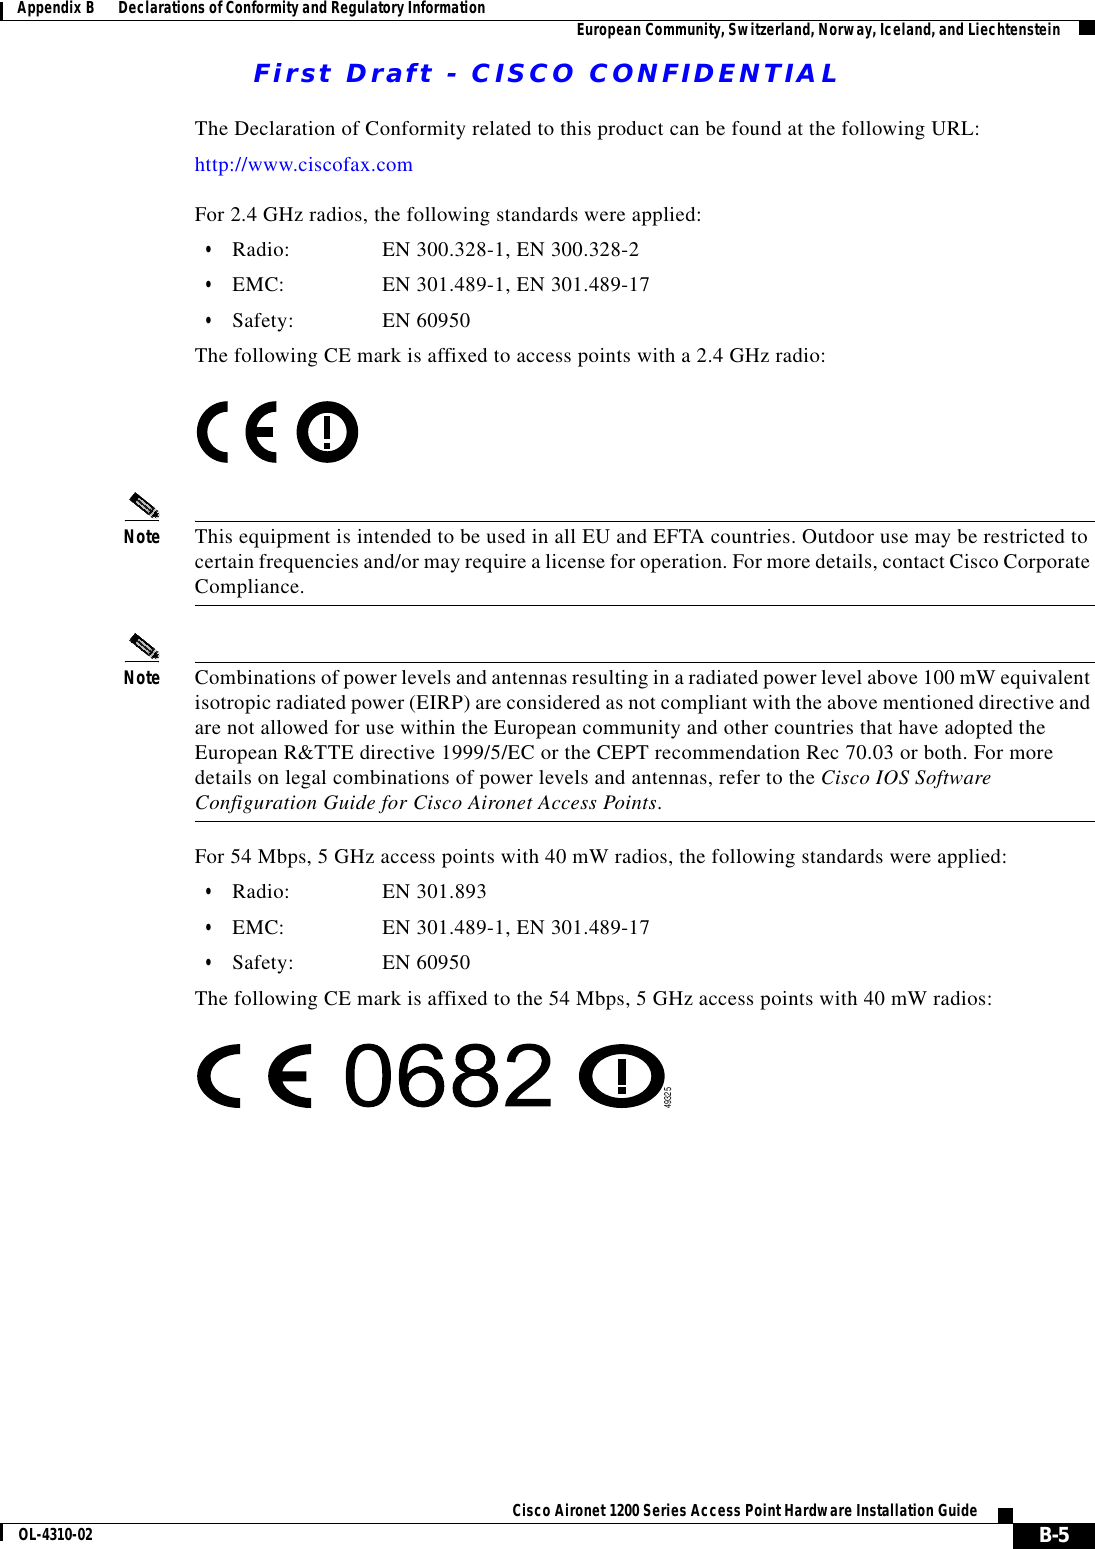 First Draft - CISCO CONFIDENTIALB-5Cisco Aironet 1200 Series Access Point Hardware Installation GuideOL-4310-02Appendix B      Declarations of Conformity and Regulatory Information European Community, Switzerland, Norway, Iceland, and LiechtensteinThe Declaration of Conformity related to this product can be found at the following URL:http://www.ciscofax.comFor 2.4 GHz radios, the following standards were applied:•Radio: EN 300.328-1, EN 300.328-2•EMC: EN 301.489-1, EN 301.489-17•Safety: EN 60950The following CE mark is affixed to access points with a 2.4 GHz radio:Note This equipment is intended to be used in all EU and EFTA countries. Outdoor use may be restricted to certain frequencies and/or may require a license for operation. For more details, contact Cisco Corporate Compliance.Note Combinations of power levels and antennas resulting in a radiated power level above 100 mW equivalent isotropic radiated power (EIRP) are considered as not compliant with the above mentioned directive and are not allowed for use within the European community and other countries that have adopted the European R&amp;TTE directive 1999/5/EC or the CEPT recommendation Rec 70.03 or both. For more details on legal combinations of power levels and antennas, refer to the Cisco IOS Software Configuration Guide for Cisco Aironet Access Points.For 54 Mbps, 5 GHz access points with 40 mW radios, the following standards were applied:•Radio: EN 301.893•EMC: EN 301.489-1, EN 301.489-17•Safety: EN 60950The following CE mark is affixed to the 54 Mbps, 5 GHz access points with 40 mW radios:49325